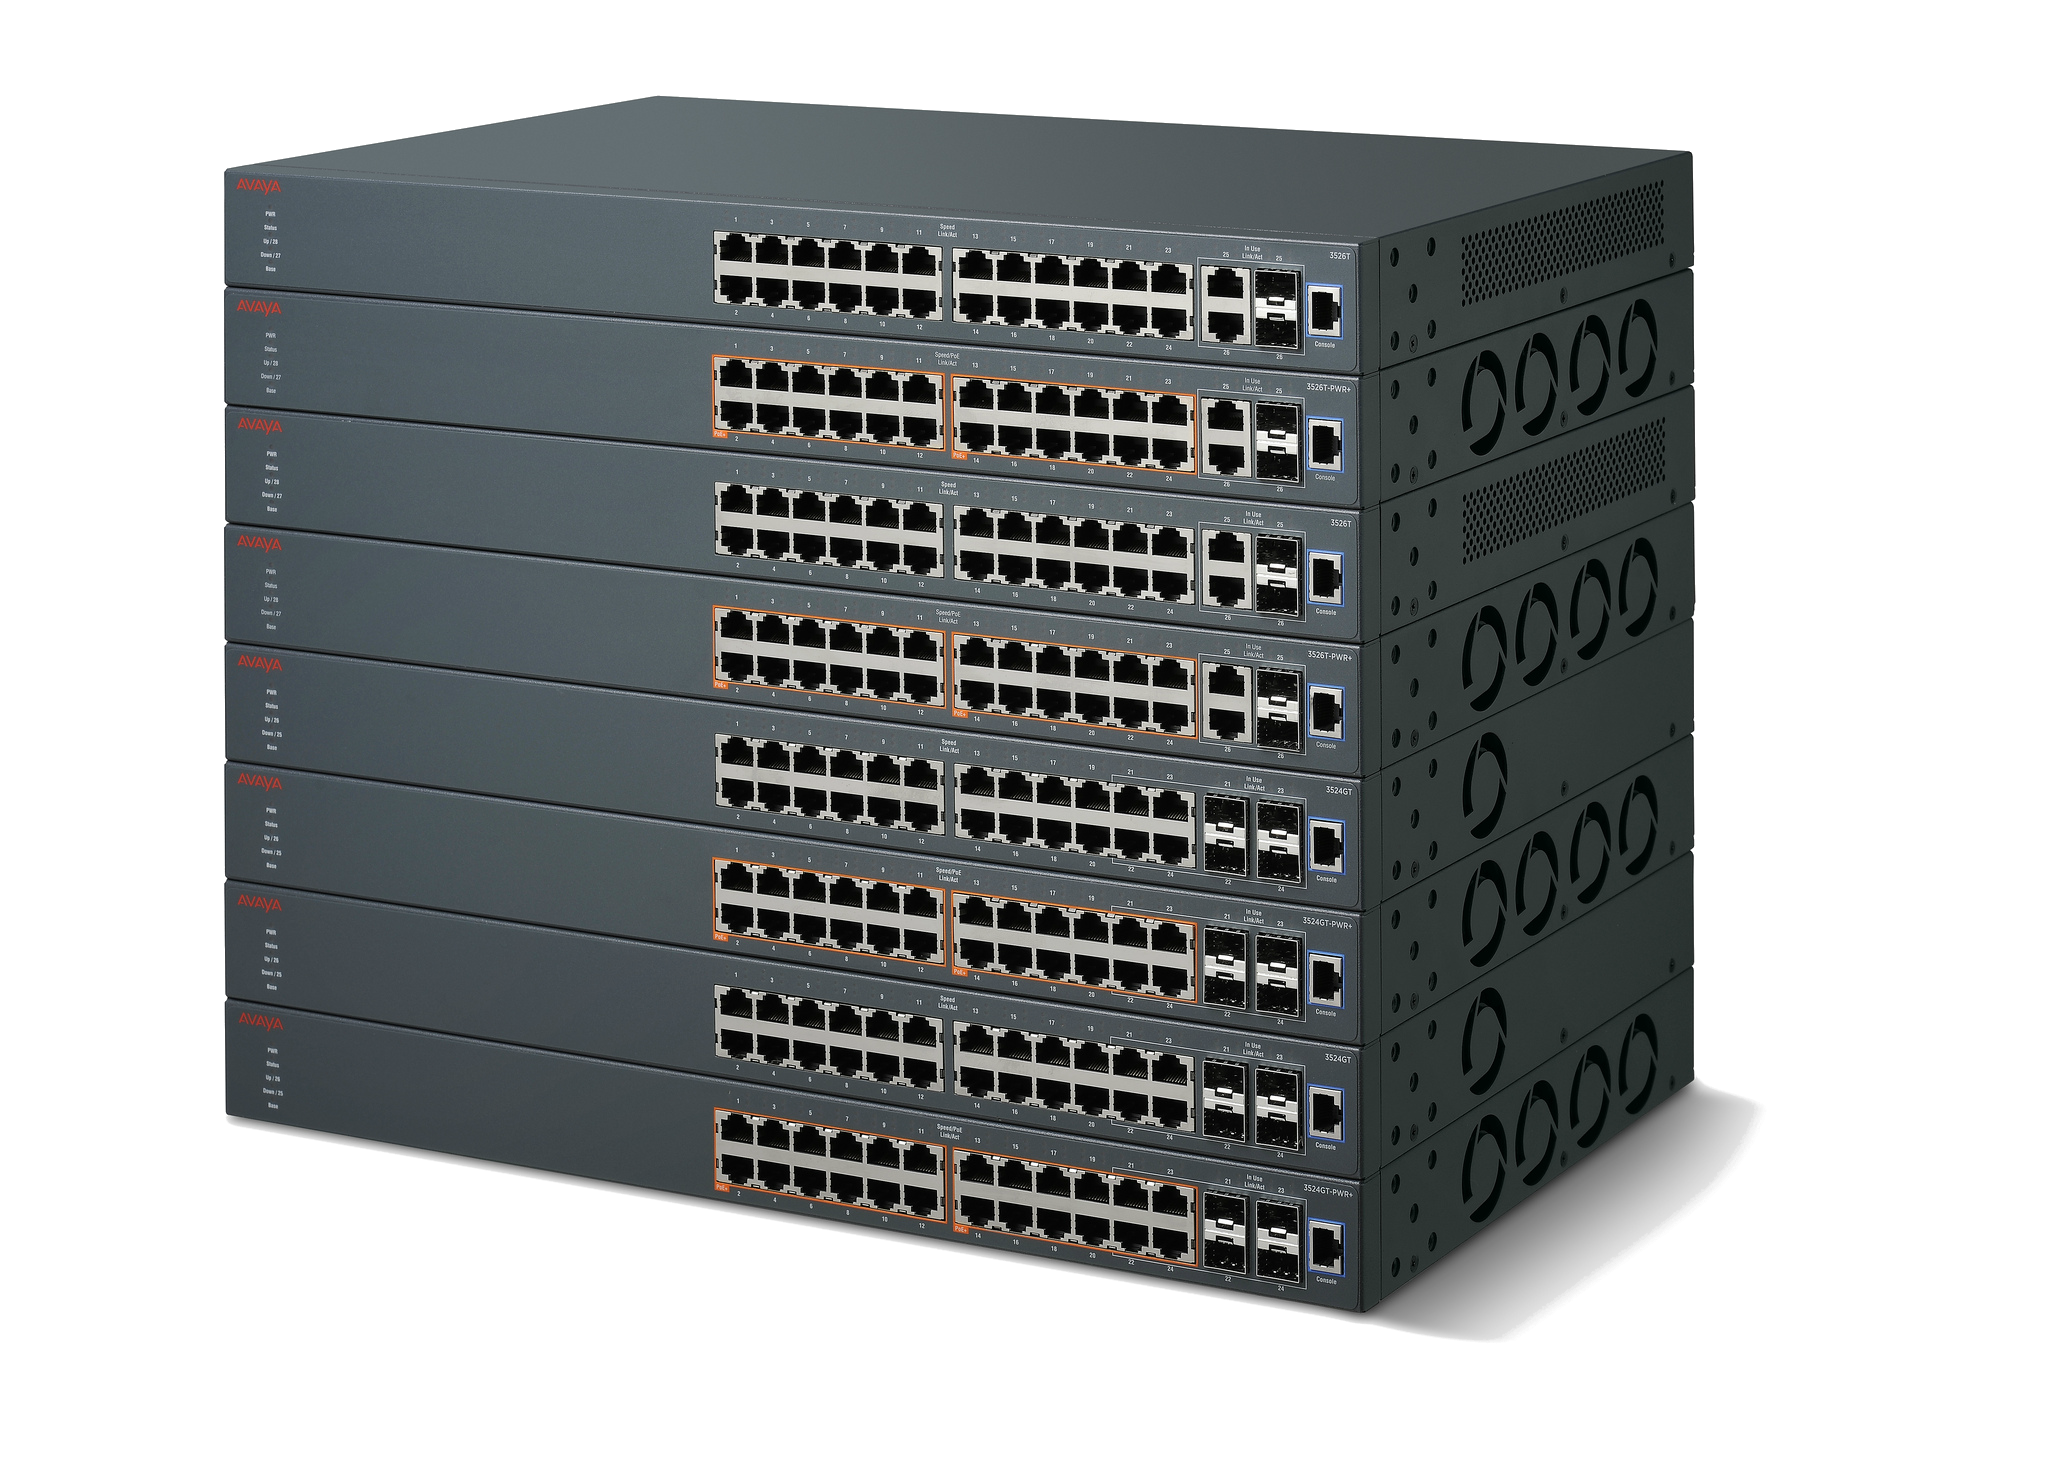 Ethernet Routing Switch 3500 Stackable Chassis